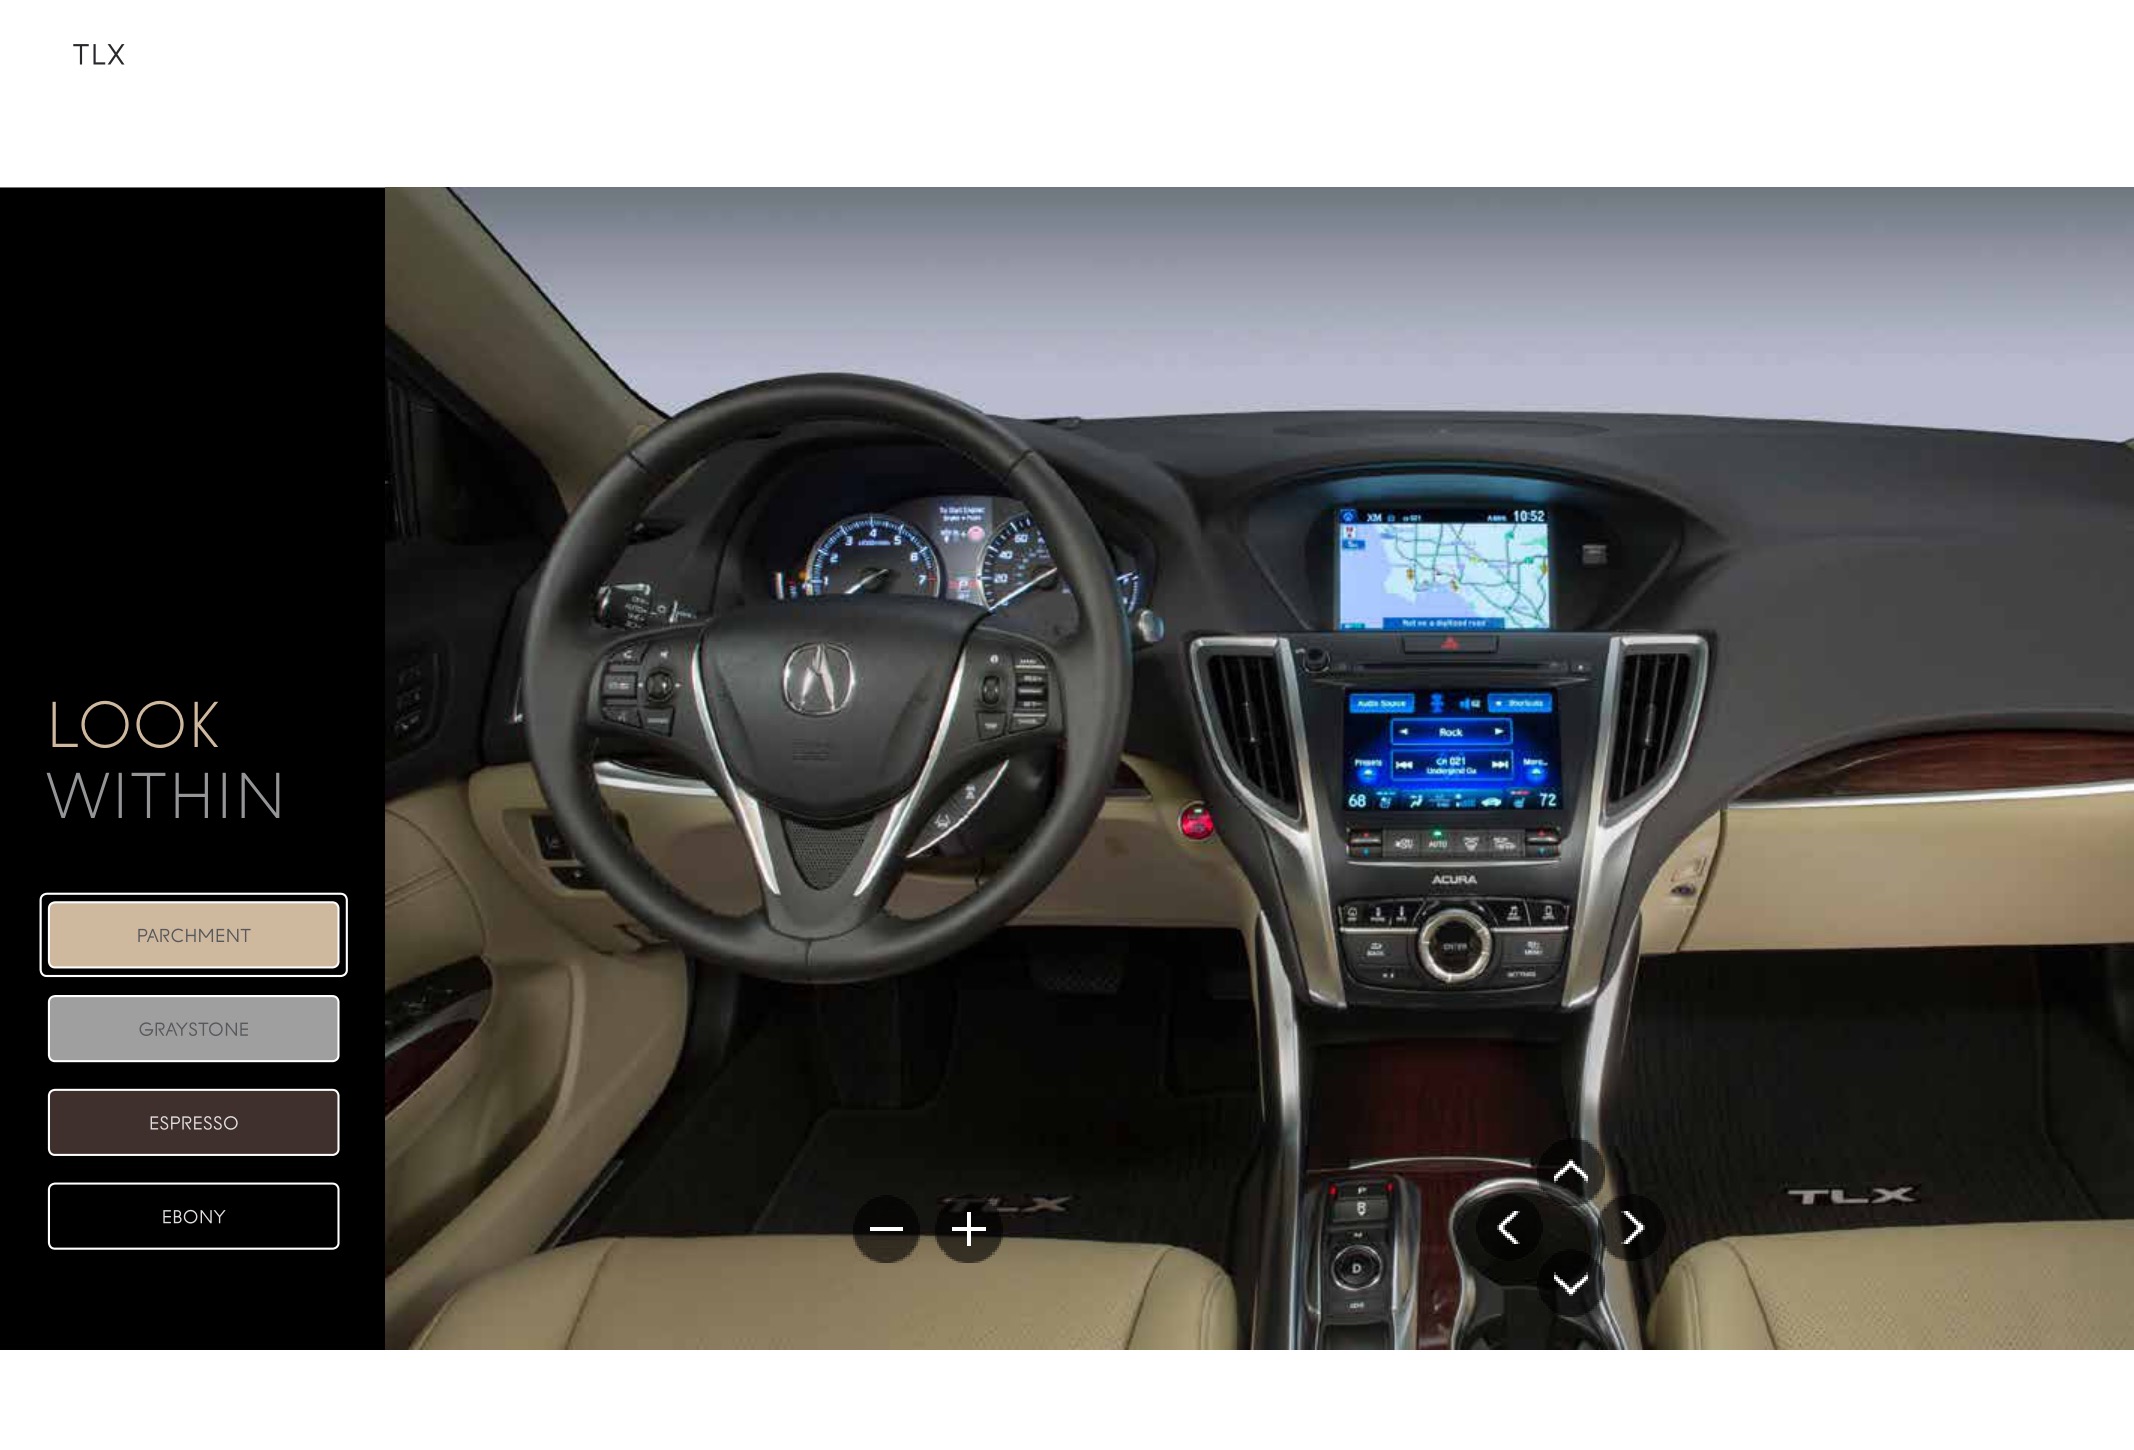 2015 Acura TLX Brochure Page 16